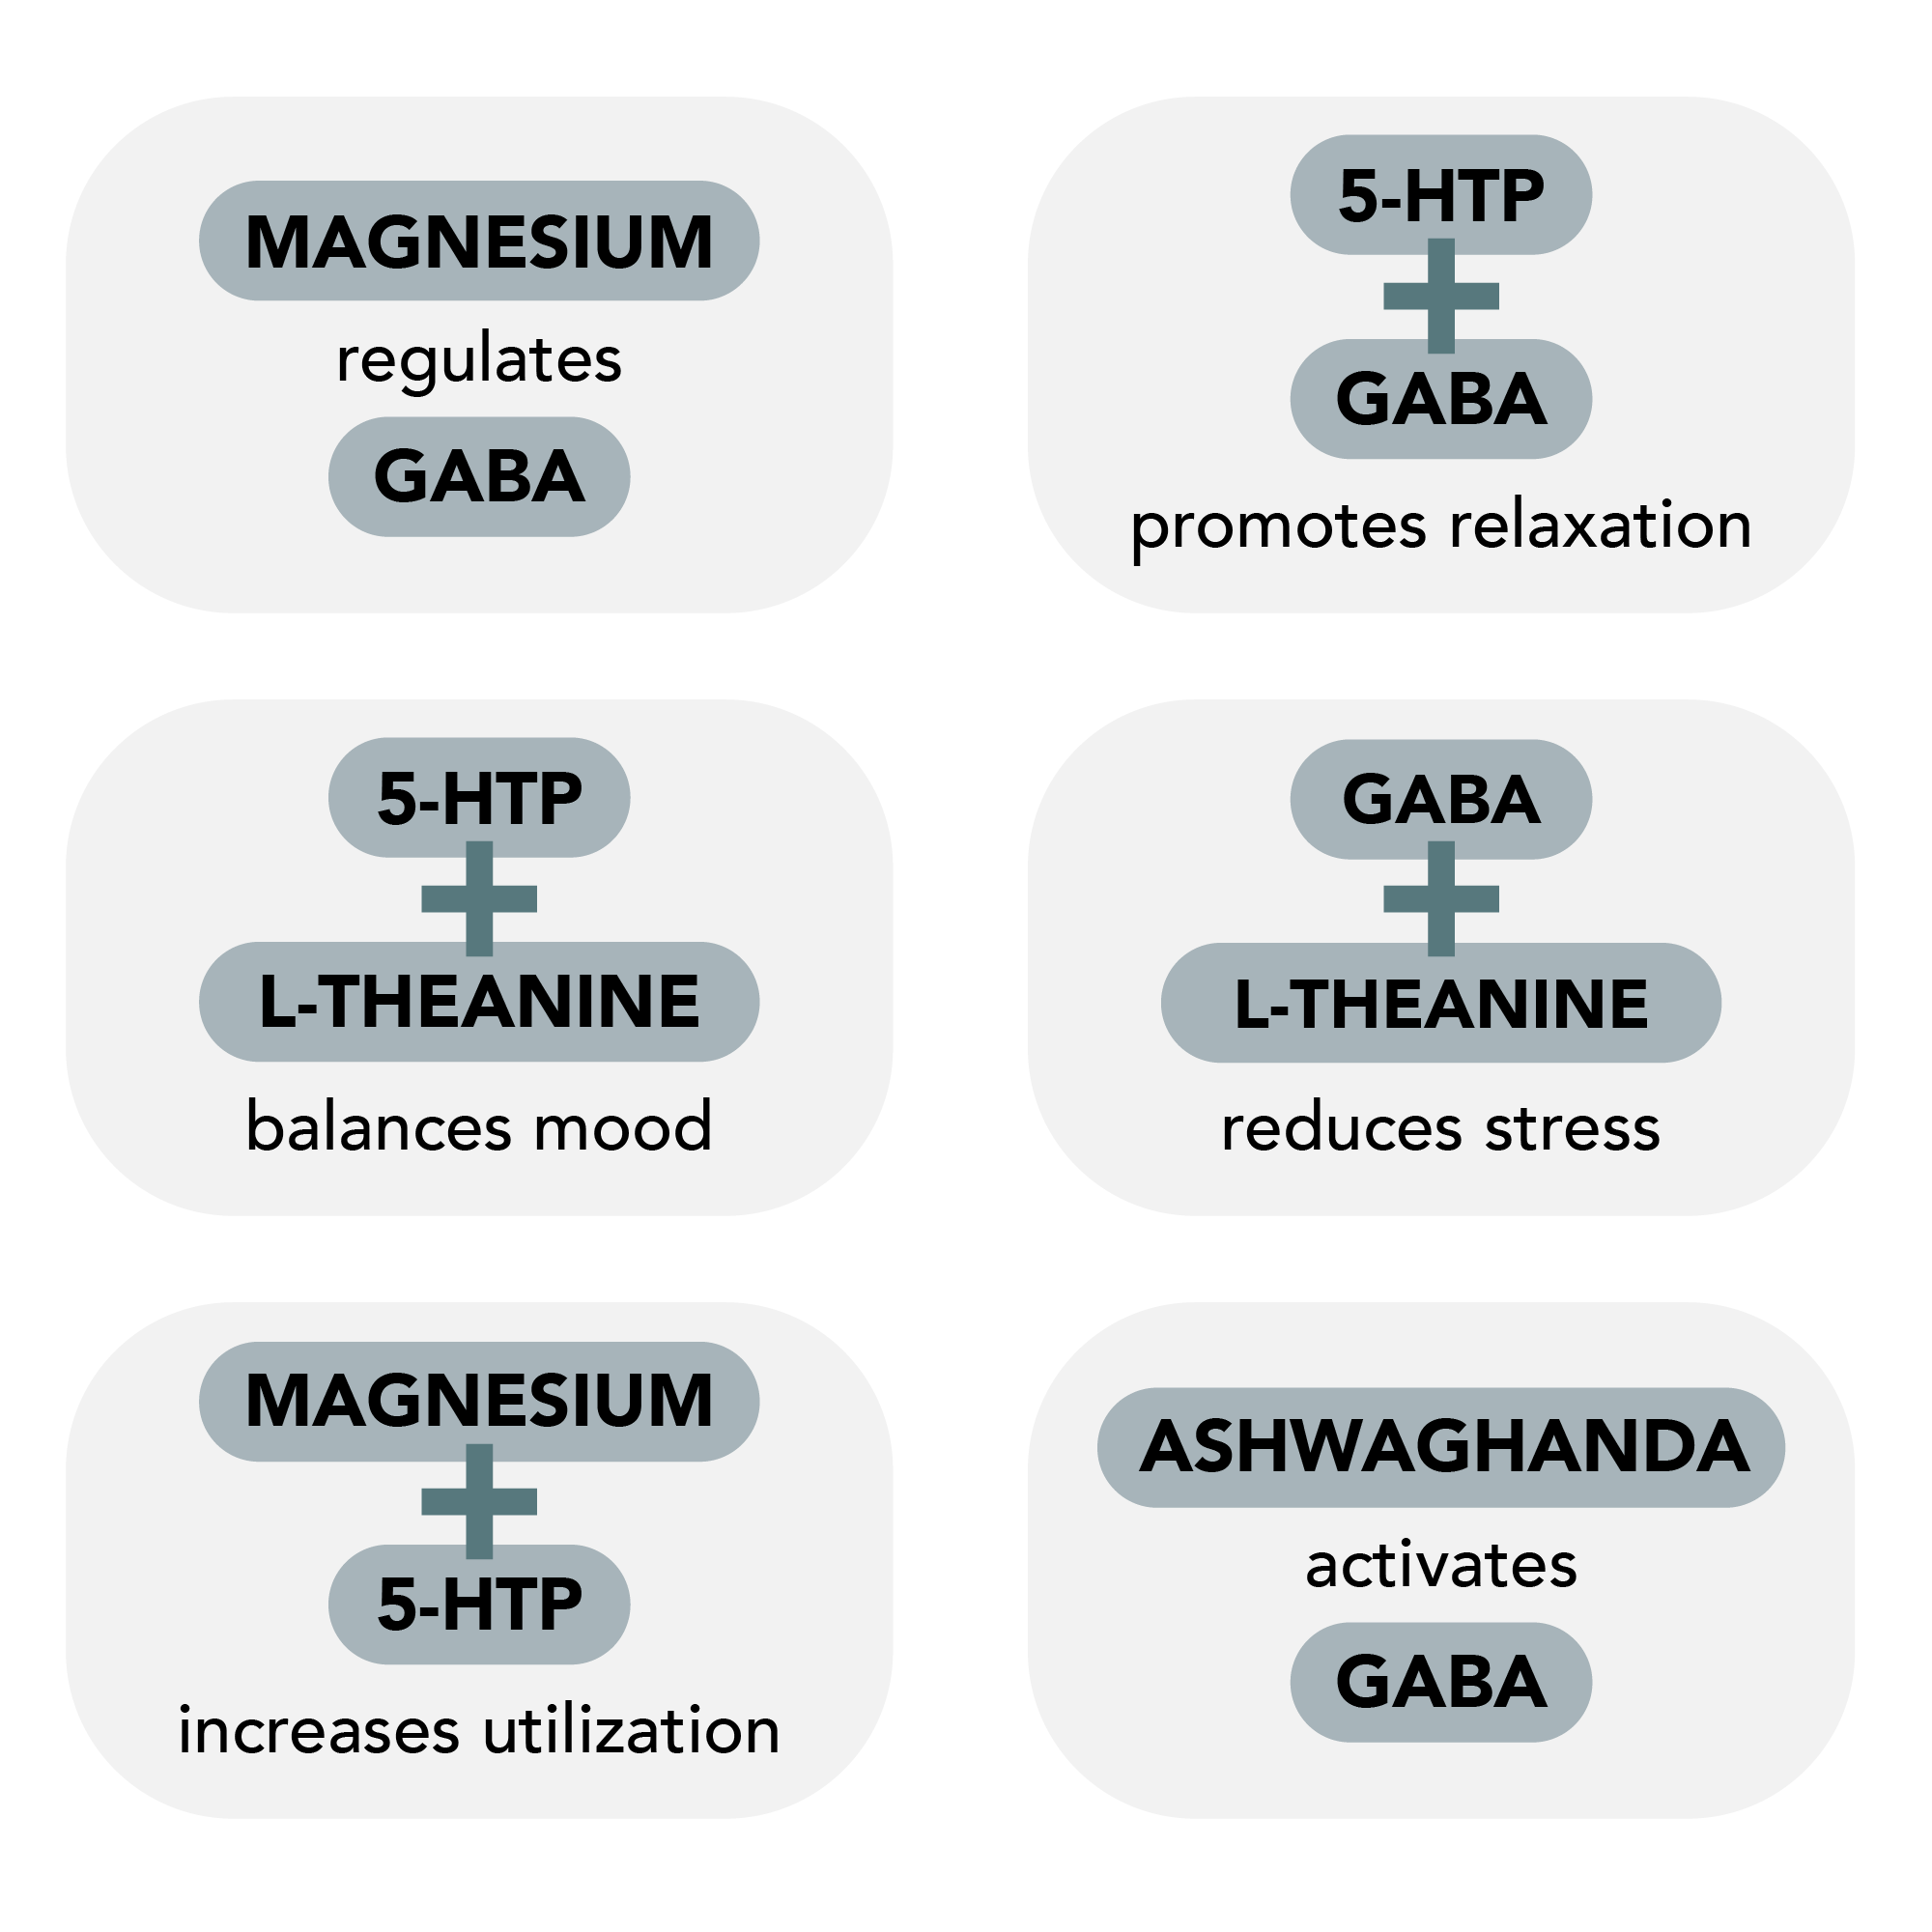 List of Synergistic Interactions between ingredients in a bottle of Better Calm by Synergic Supplements.. Magnesium regulates GABA. 5-HTP and L-Theanine balances mood, Magnesium and 5-HTP increases utilization, 5-HTP and GABA promote relaxation, GABA and L-Theanine reduce stress,  Ashwaghanda activates GABA